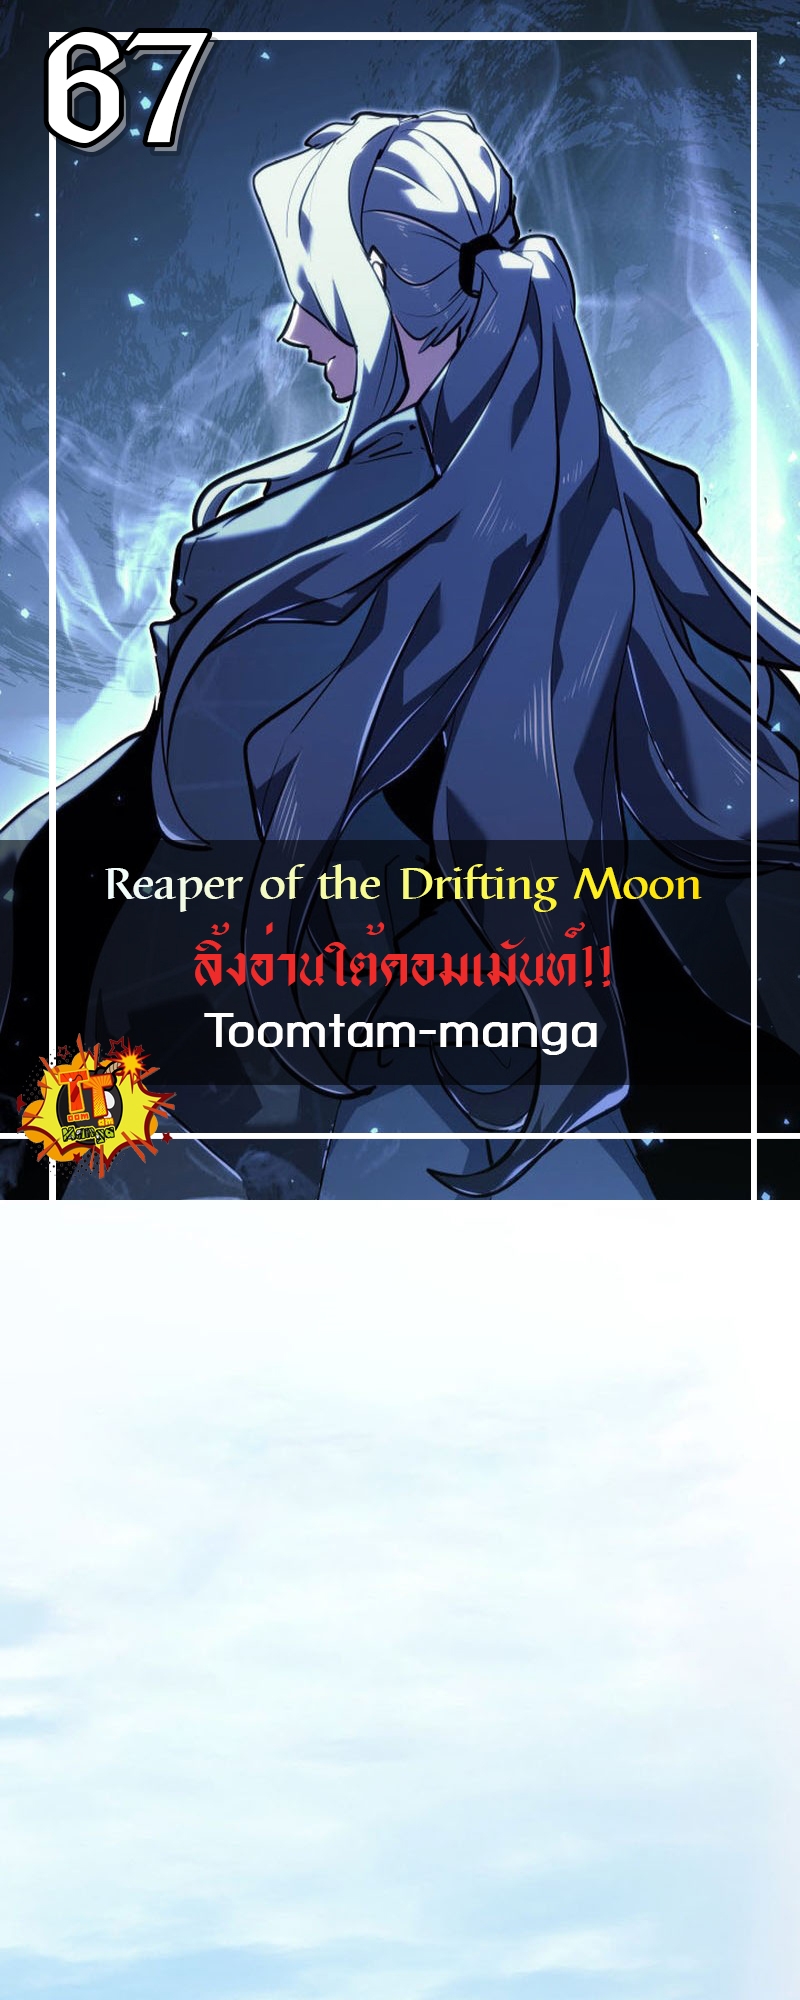 Reaper of the Drifting Moon 67 21 12 25660001